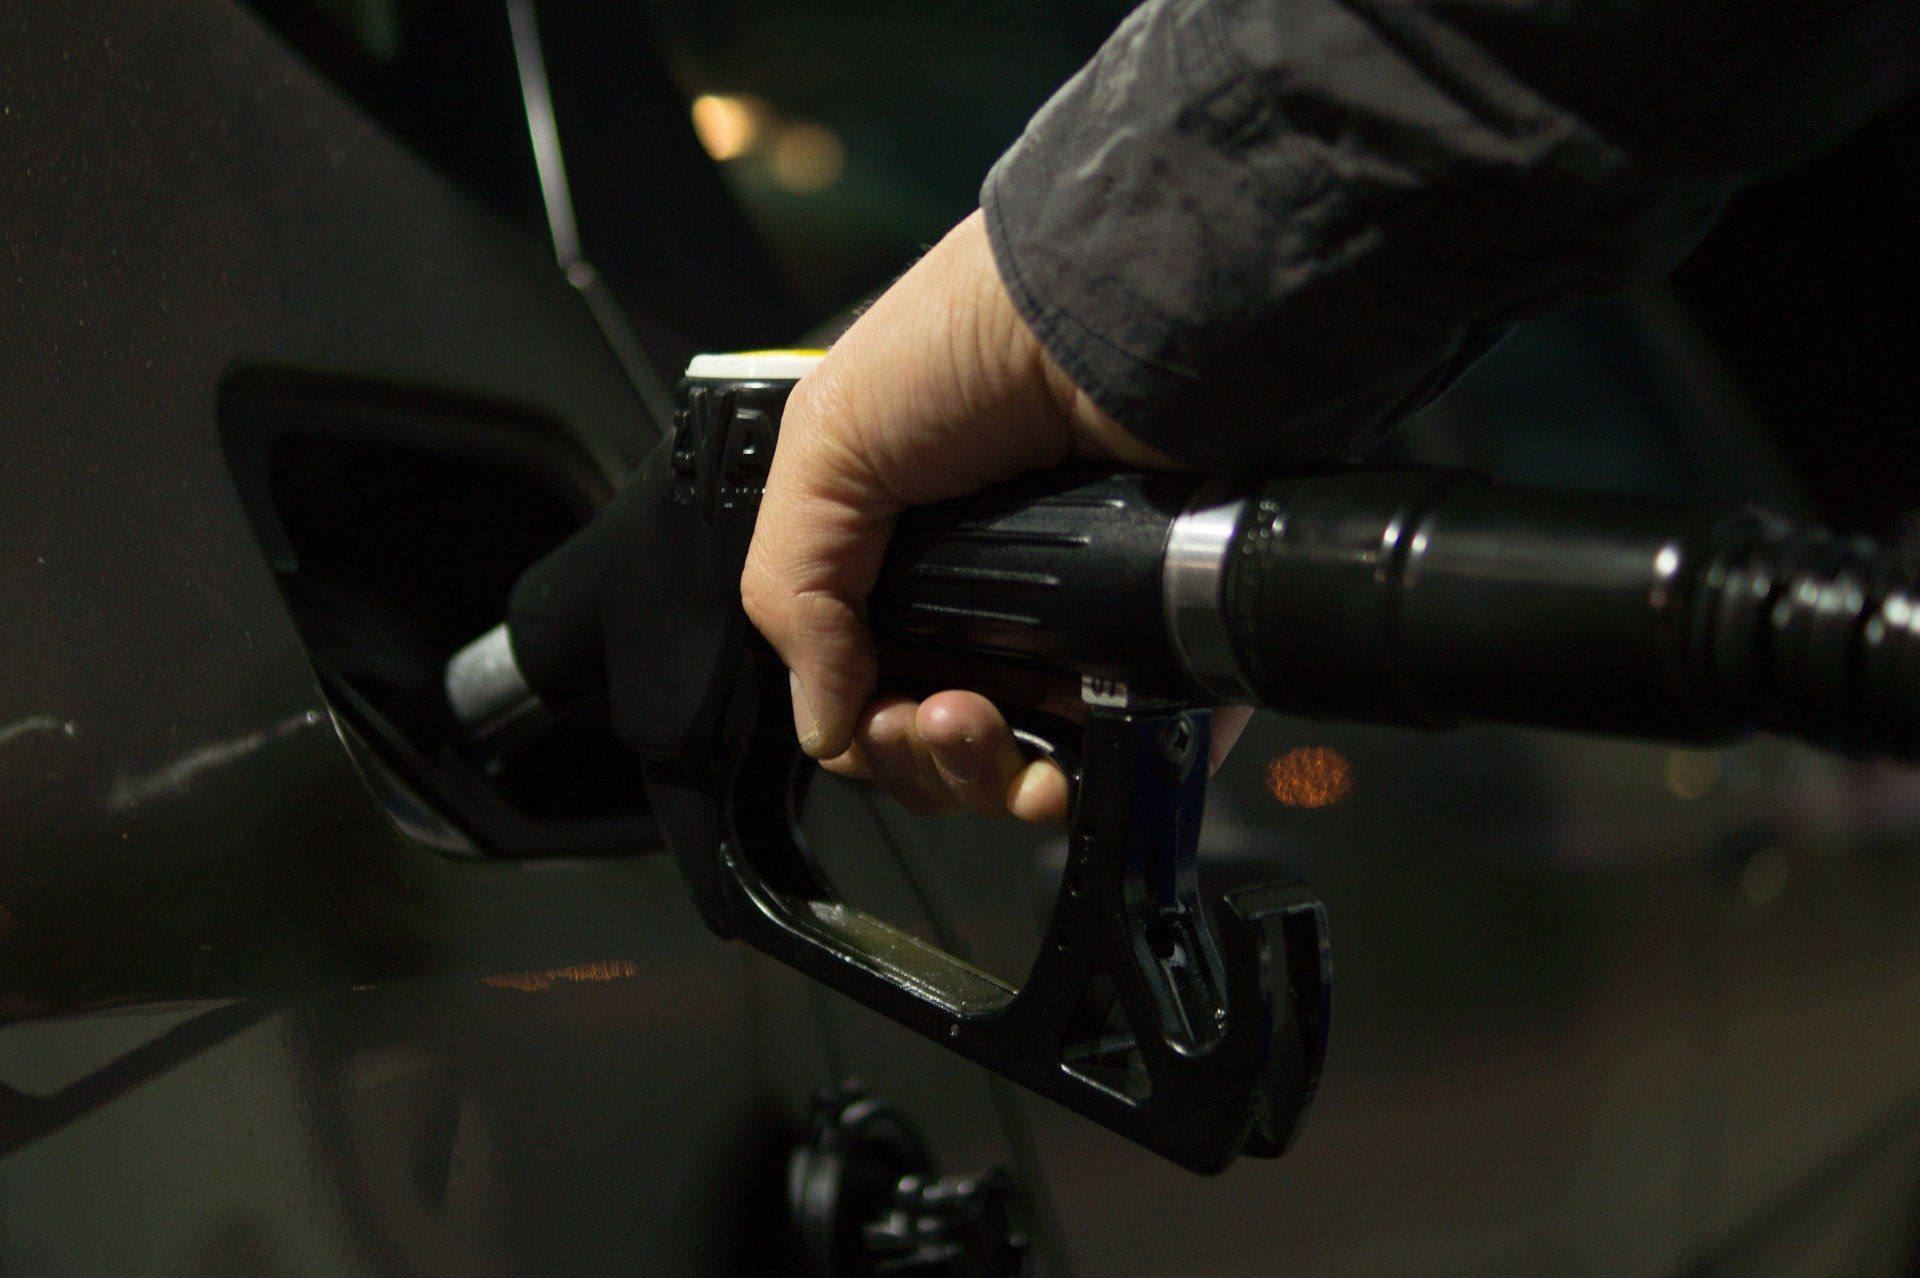 Fuel Price today: Petrol priced at Rs 95.41, diesel Rs 86.67 in Delhi on December 10